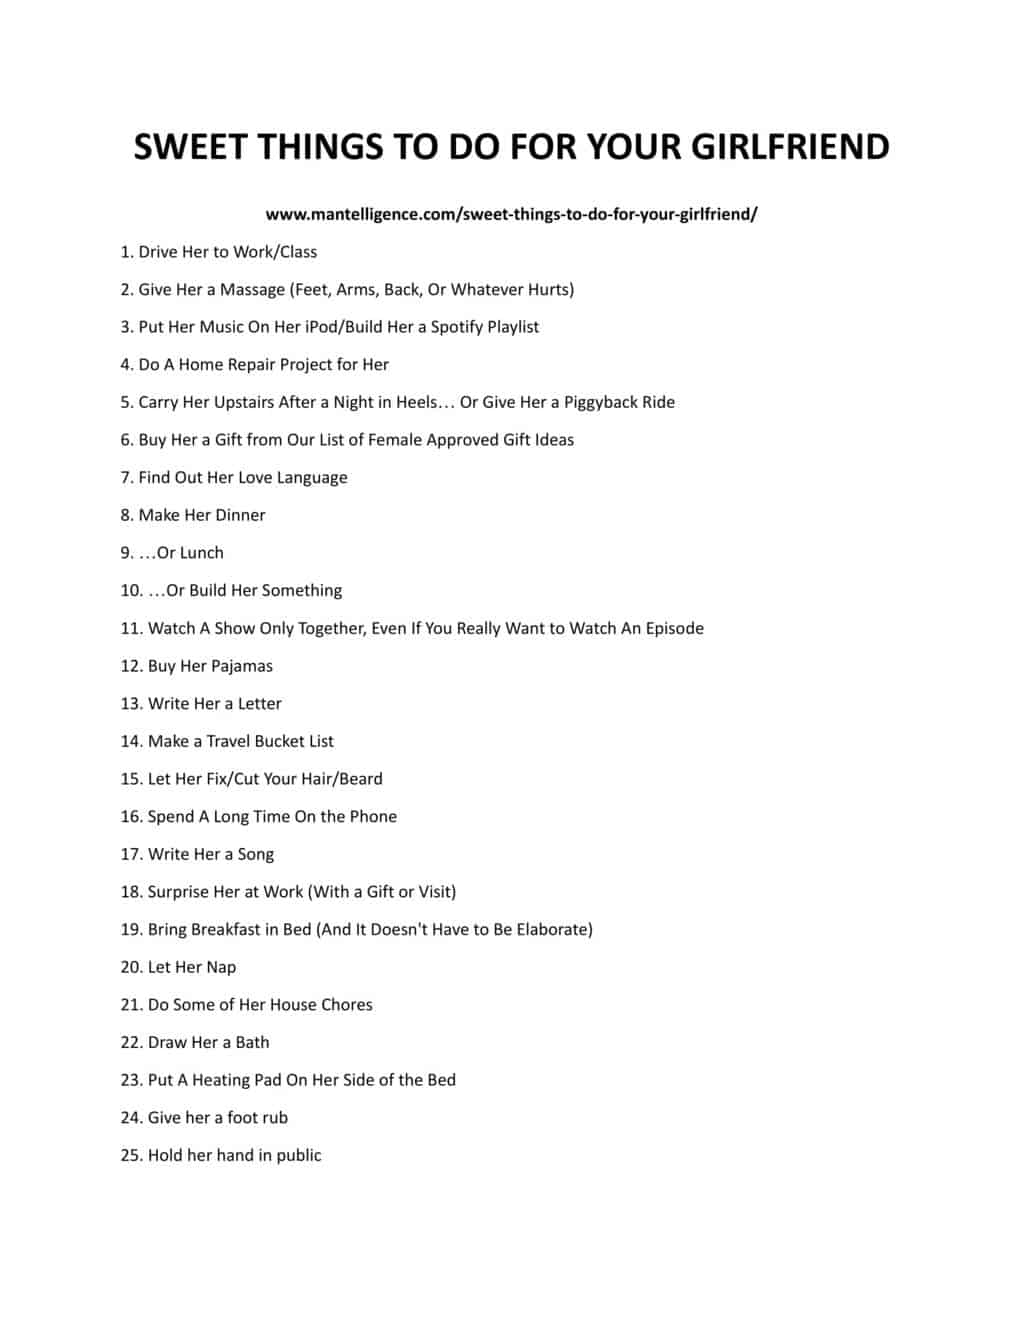 96 Things To Do For Your Girlfriend (Sweet, Cute, Romantic)